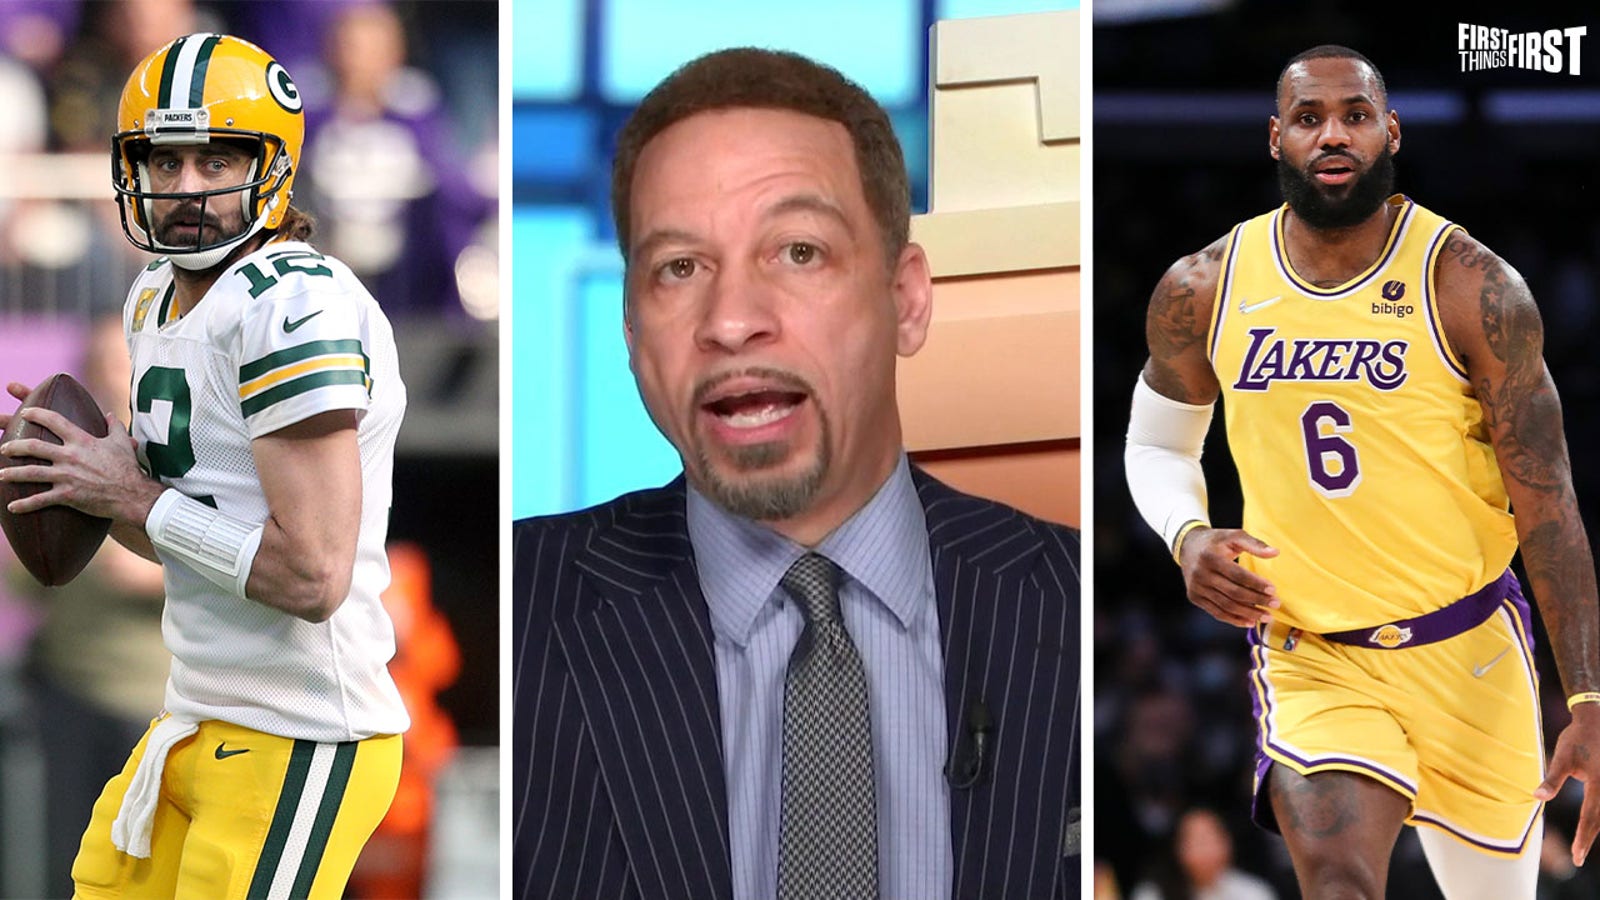 Five NBA and NFL figures who are "under duress"